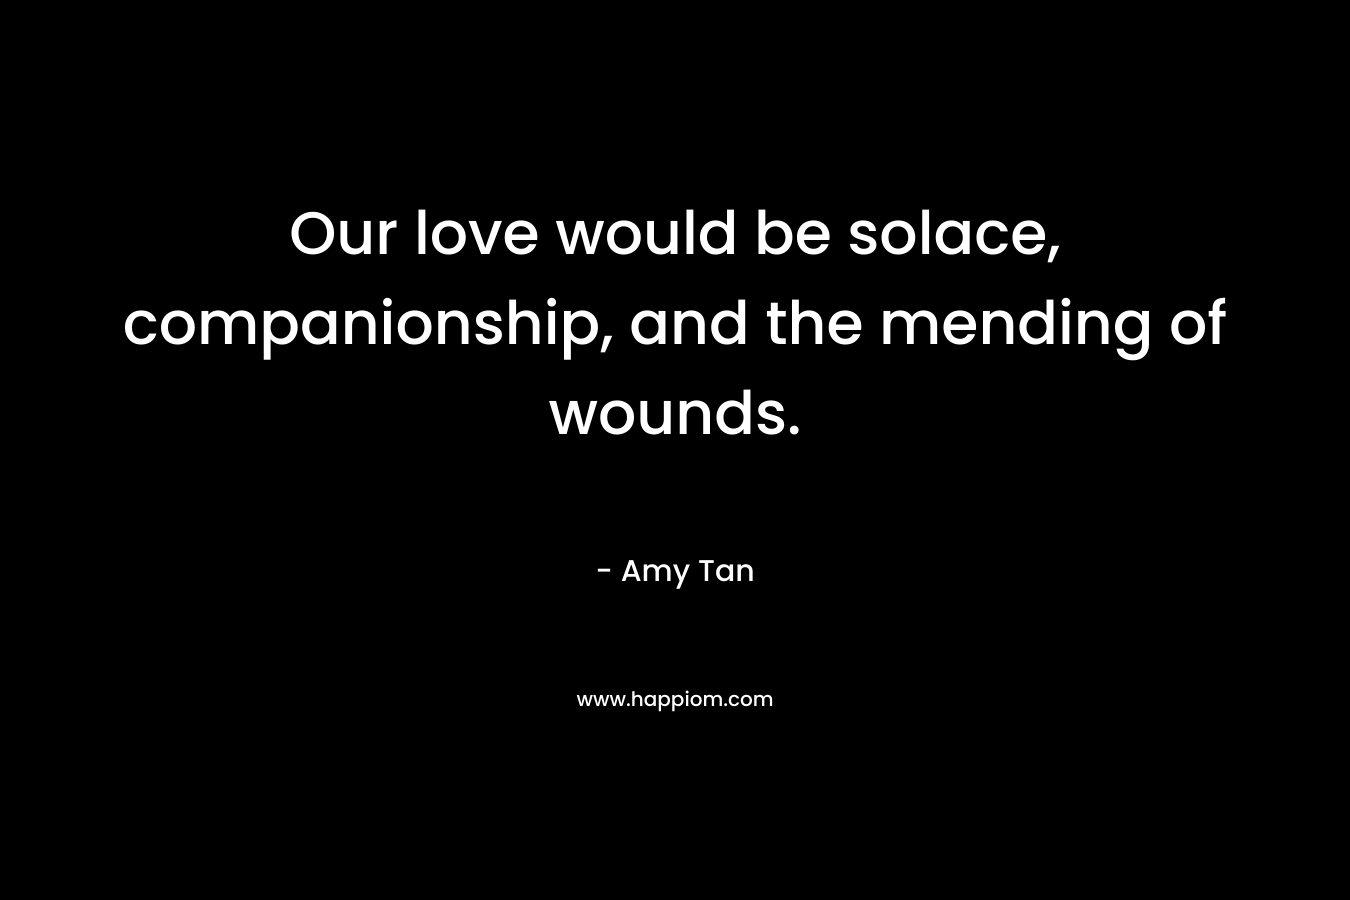 Our love would be solace, companionship, and the mending of wounds. – Amy Tan